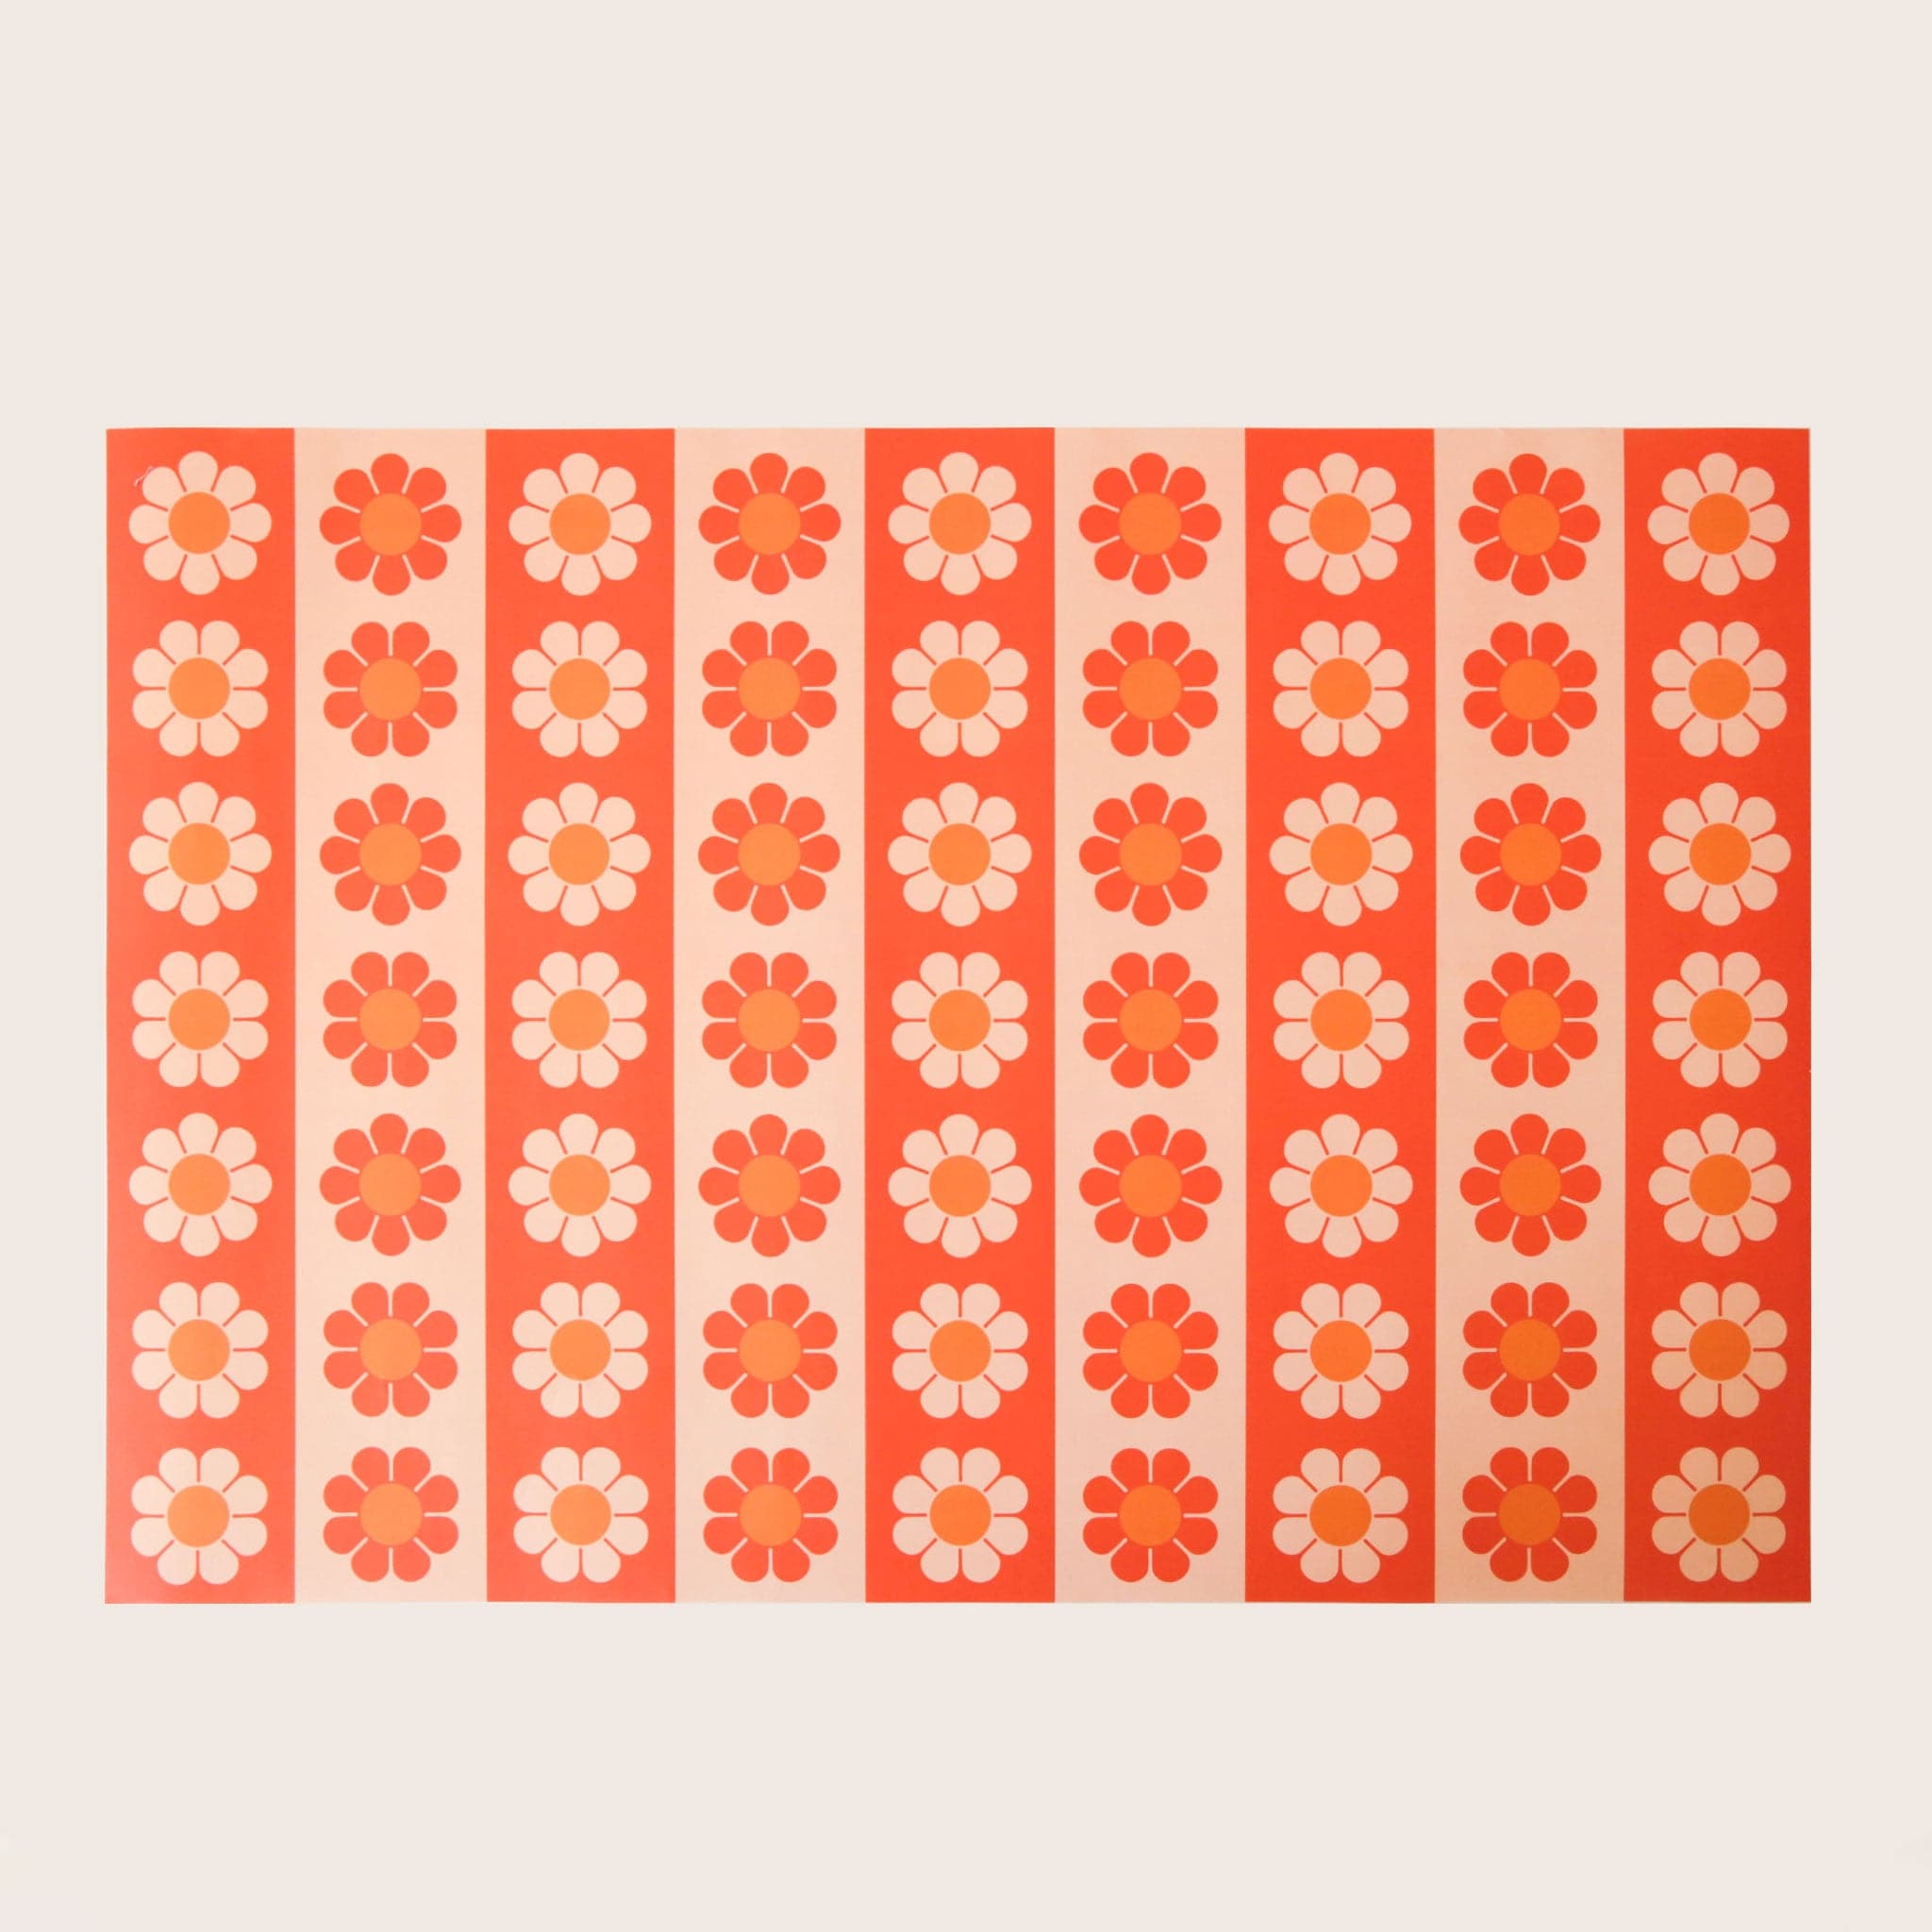 Wrapping paper with an alternating daisy pattern going from light yellow and orange daisies to red and orange. 